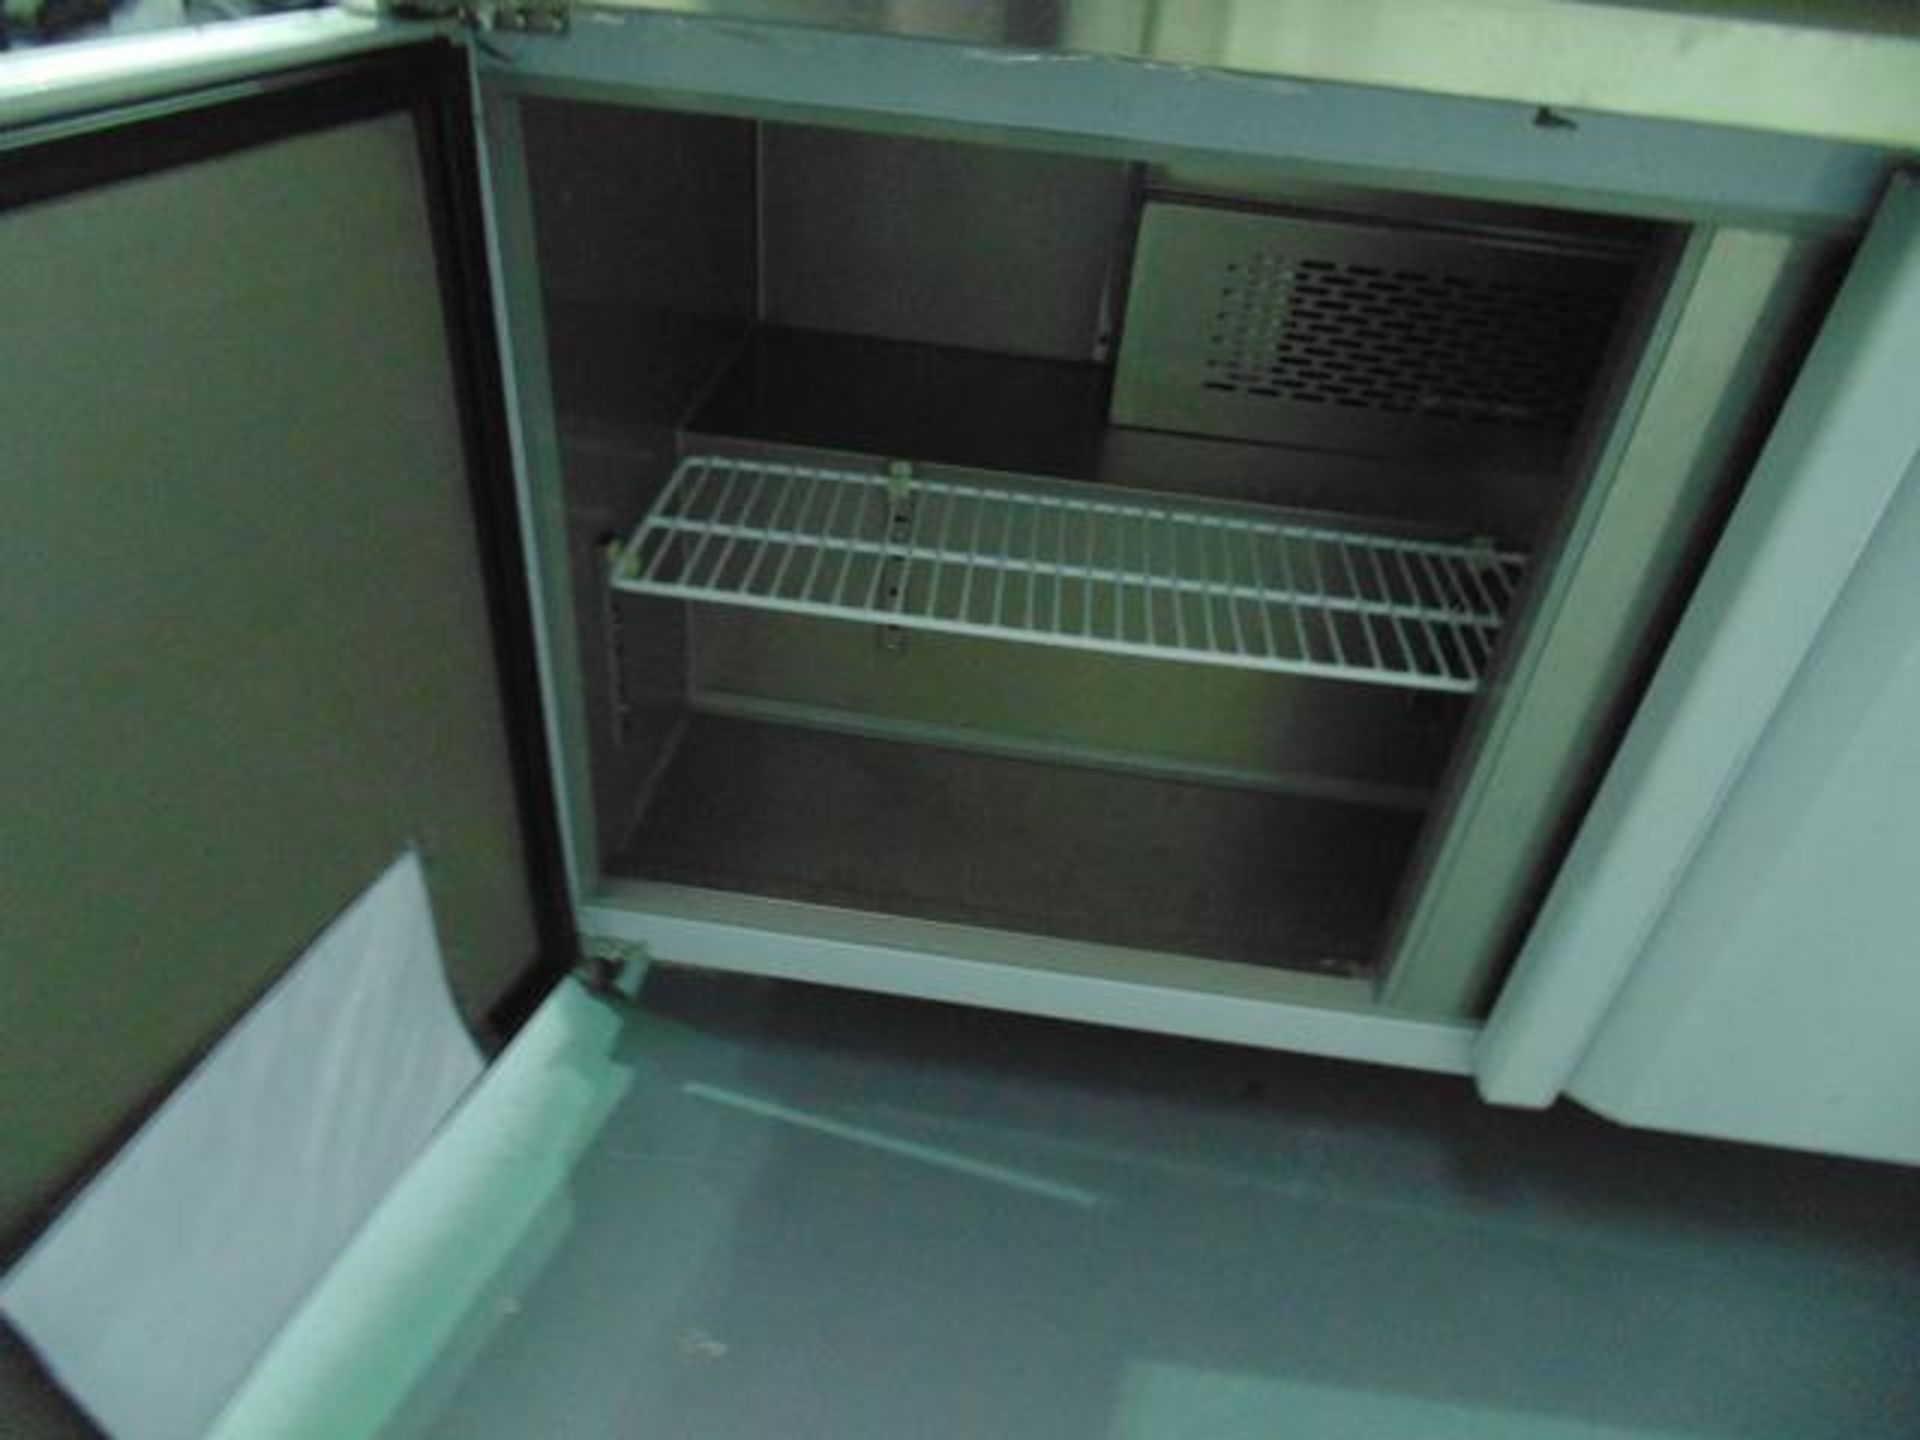 Saladette / pizza refrigerated preparation counter gastronorm counter top with two door refrigerated - Image 3 of 3